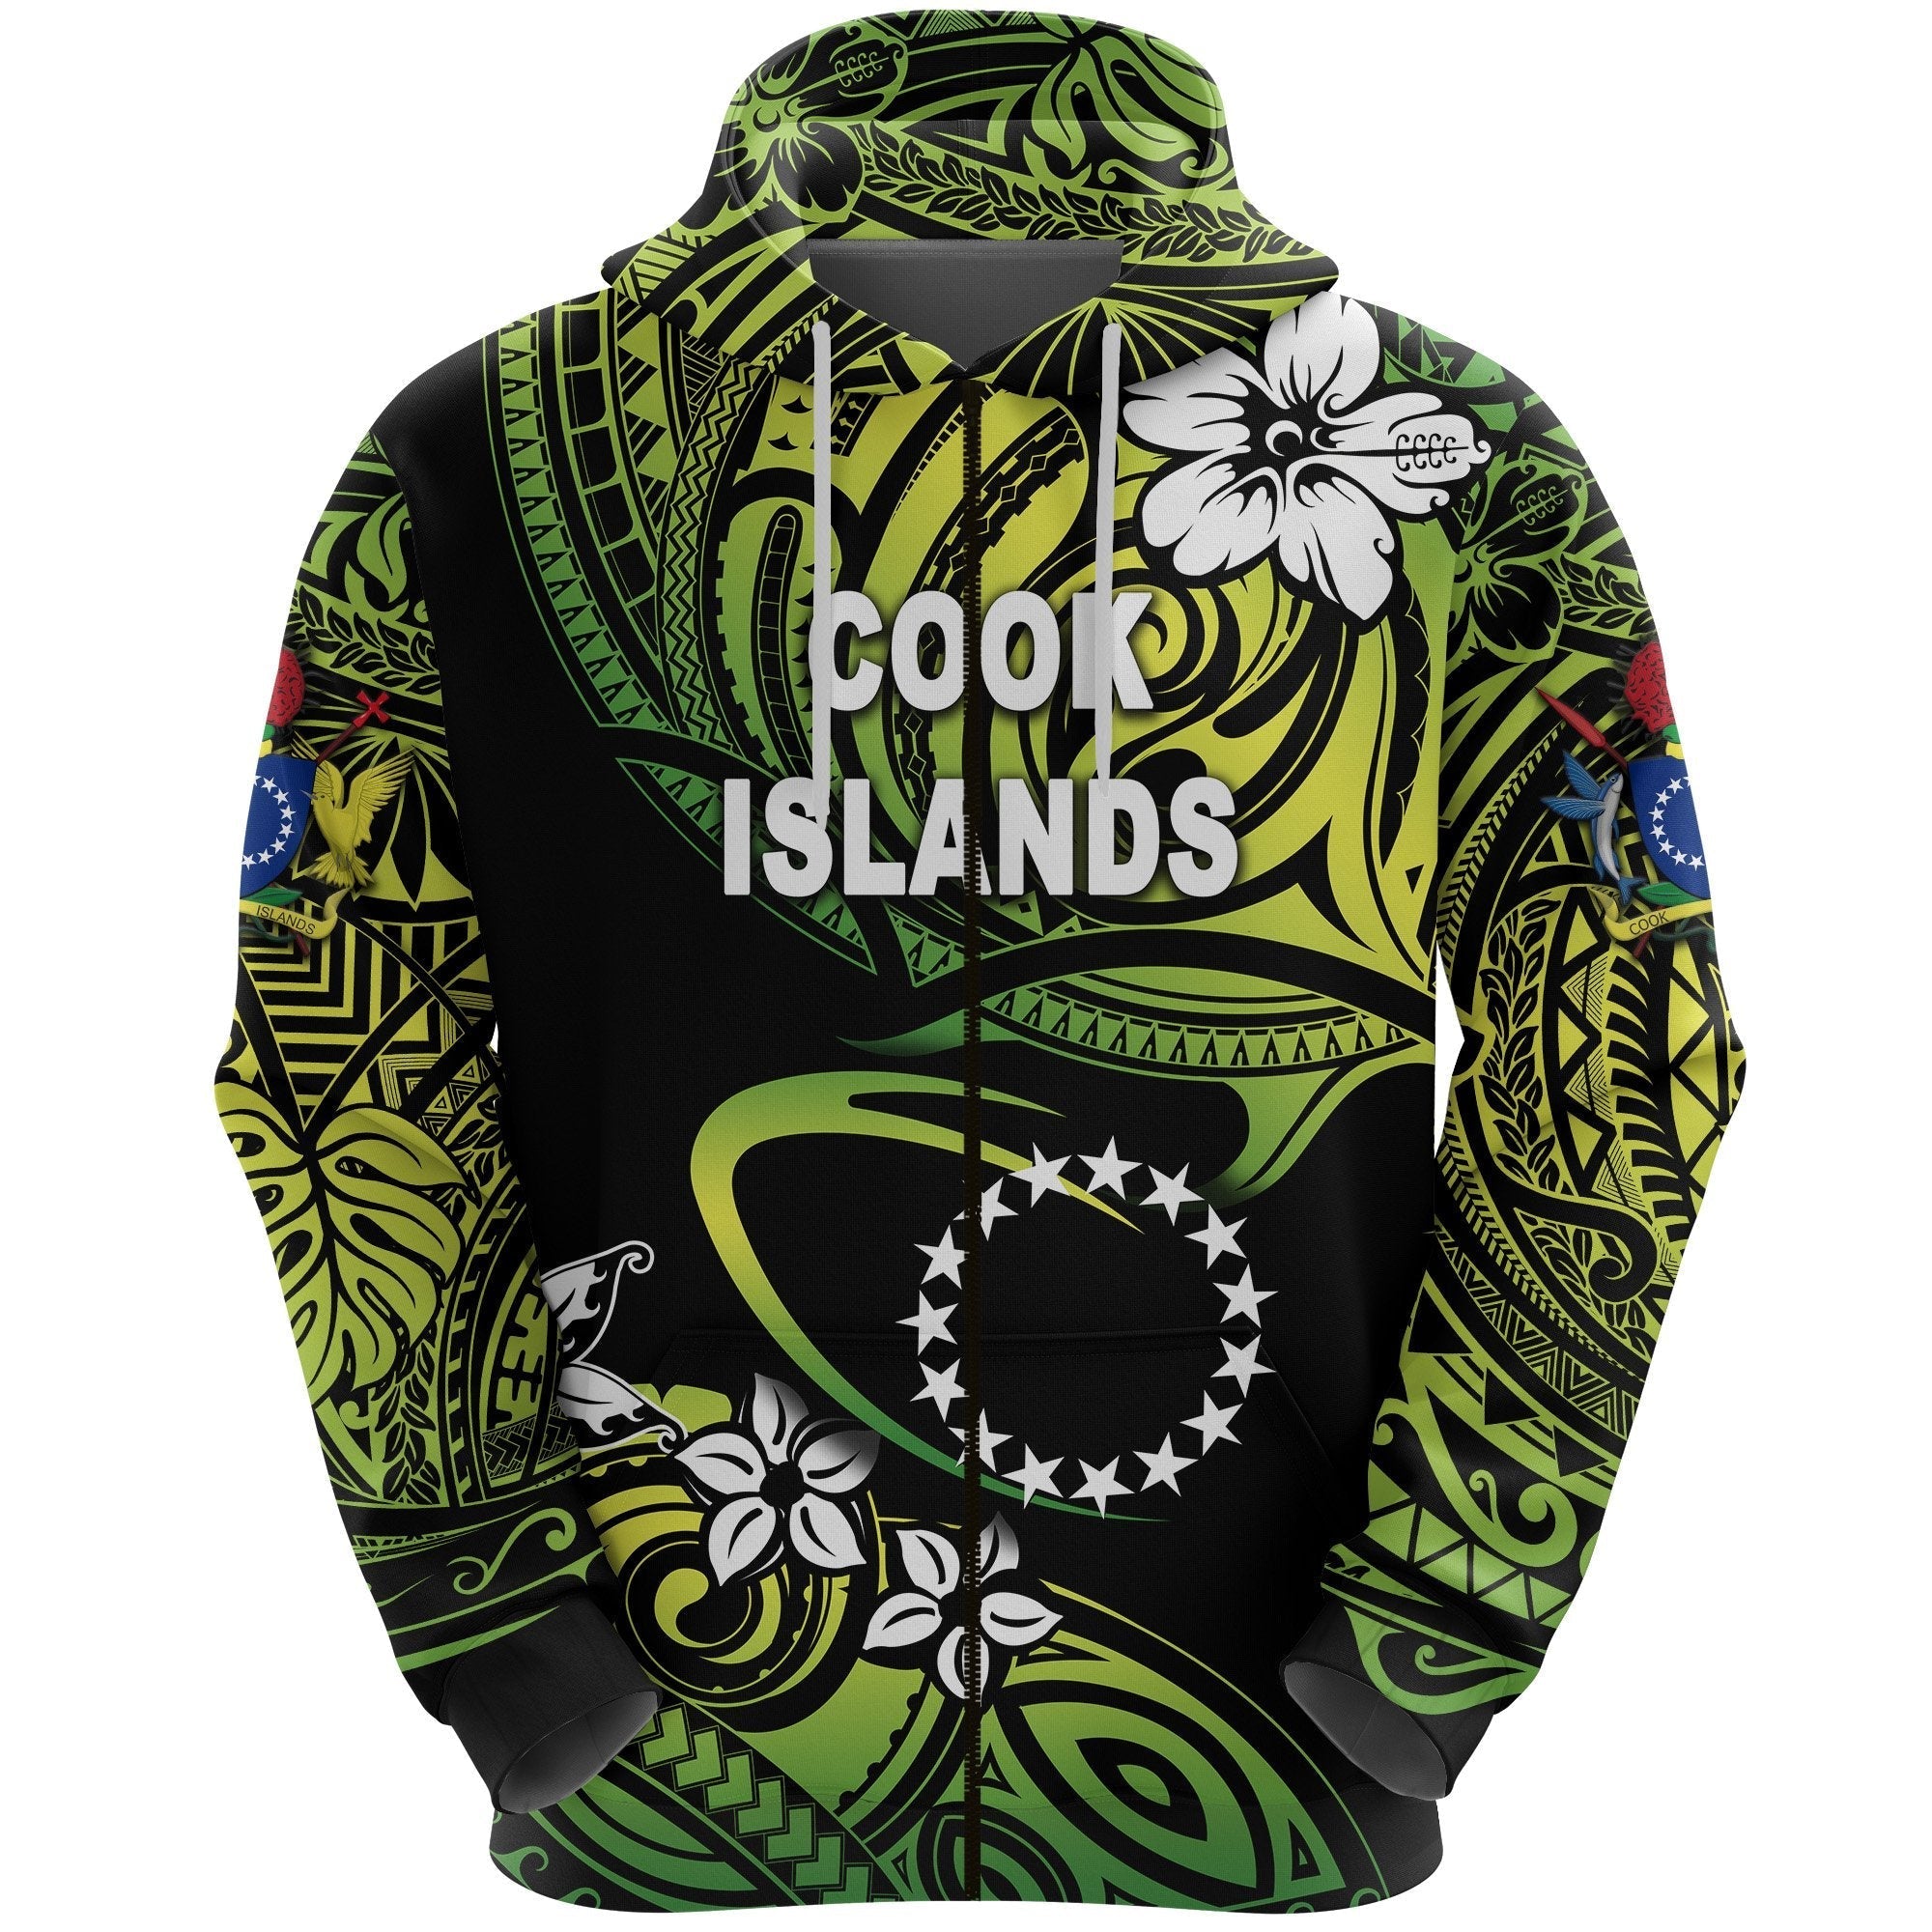 custom-personalised-cook-islands-rugby-zip-hoodie-unique-vibes-green-custom-text-and-number